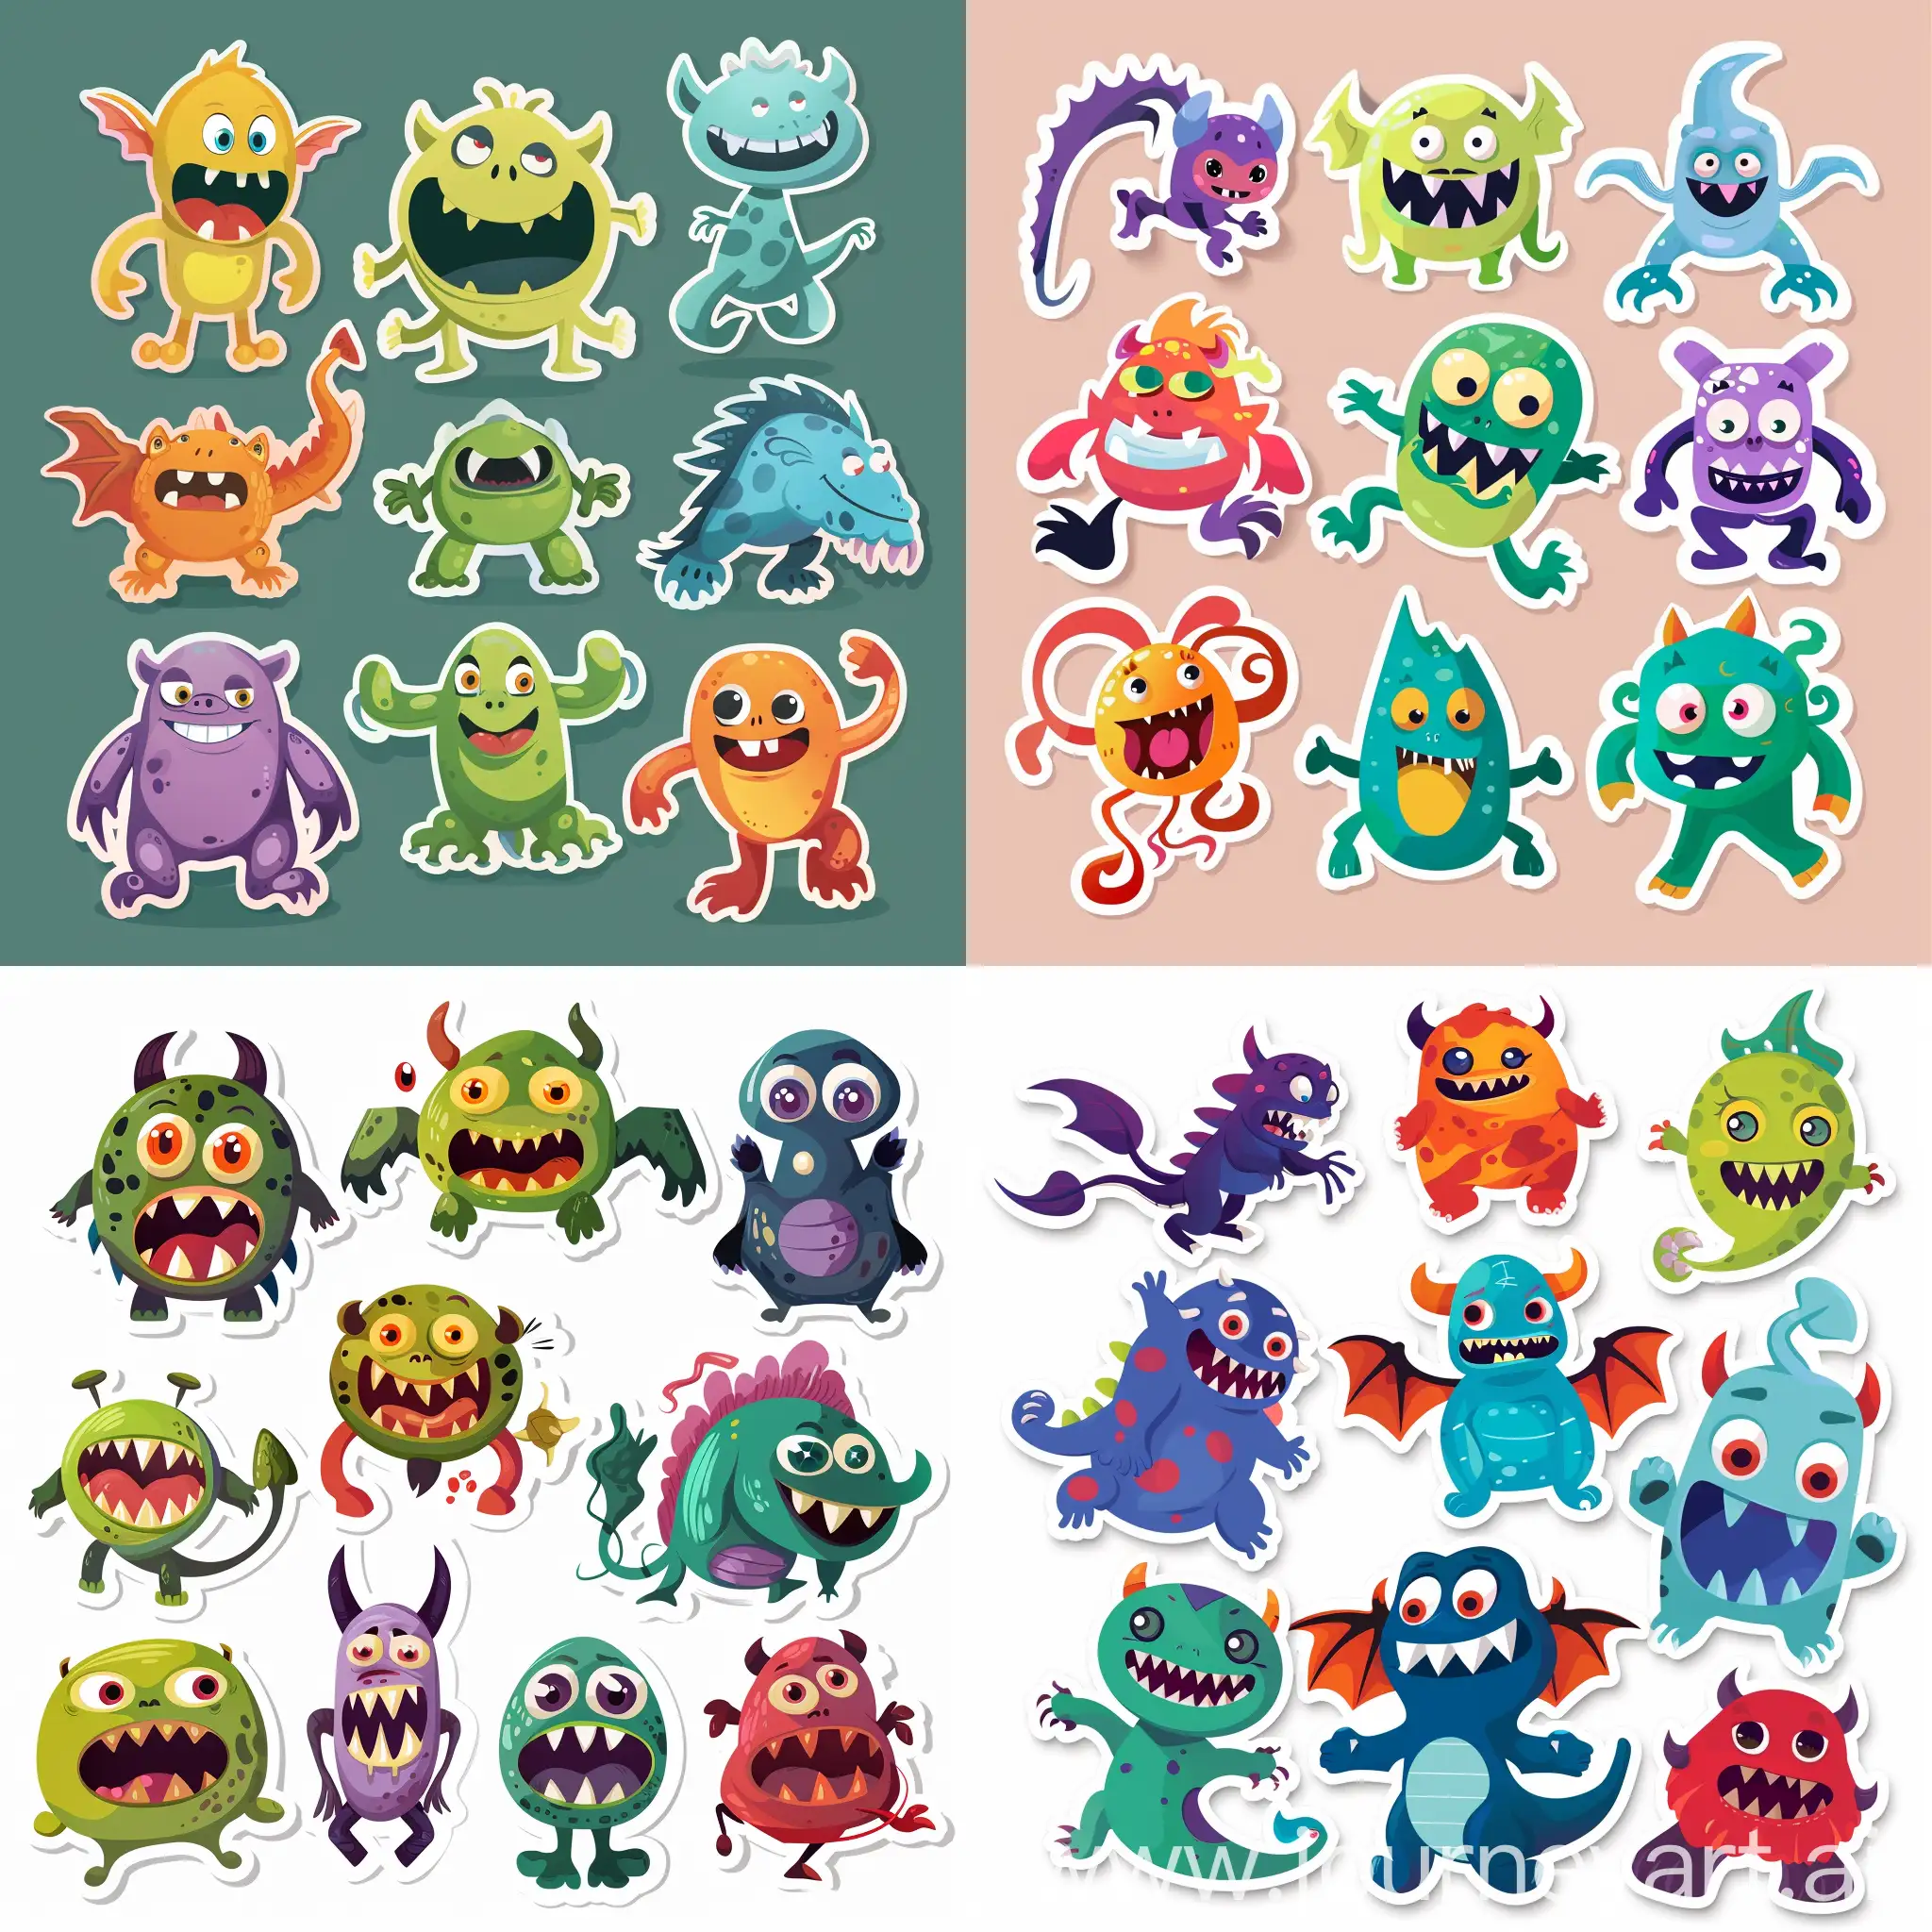 HighQuality-Flat-Style-Cute-Scary-Cartoon-Monster-Stickers